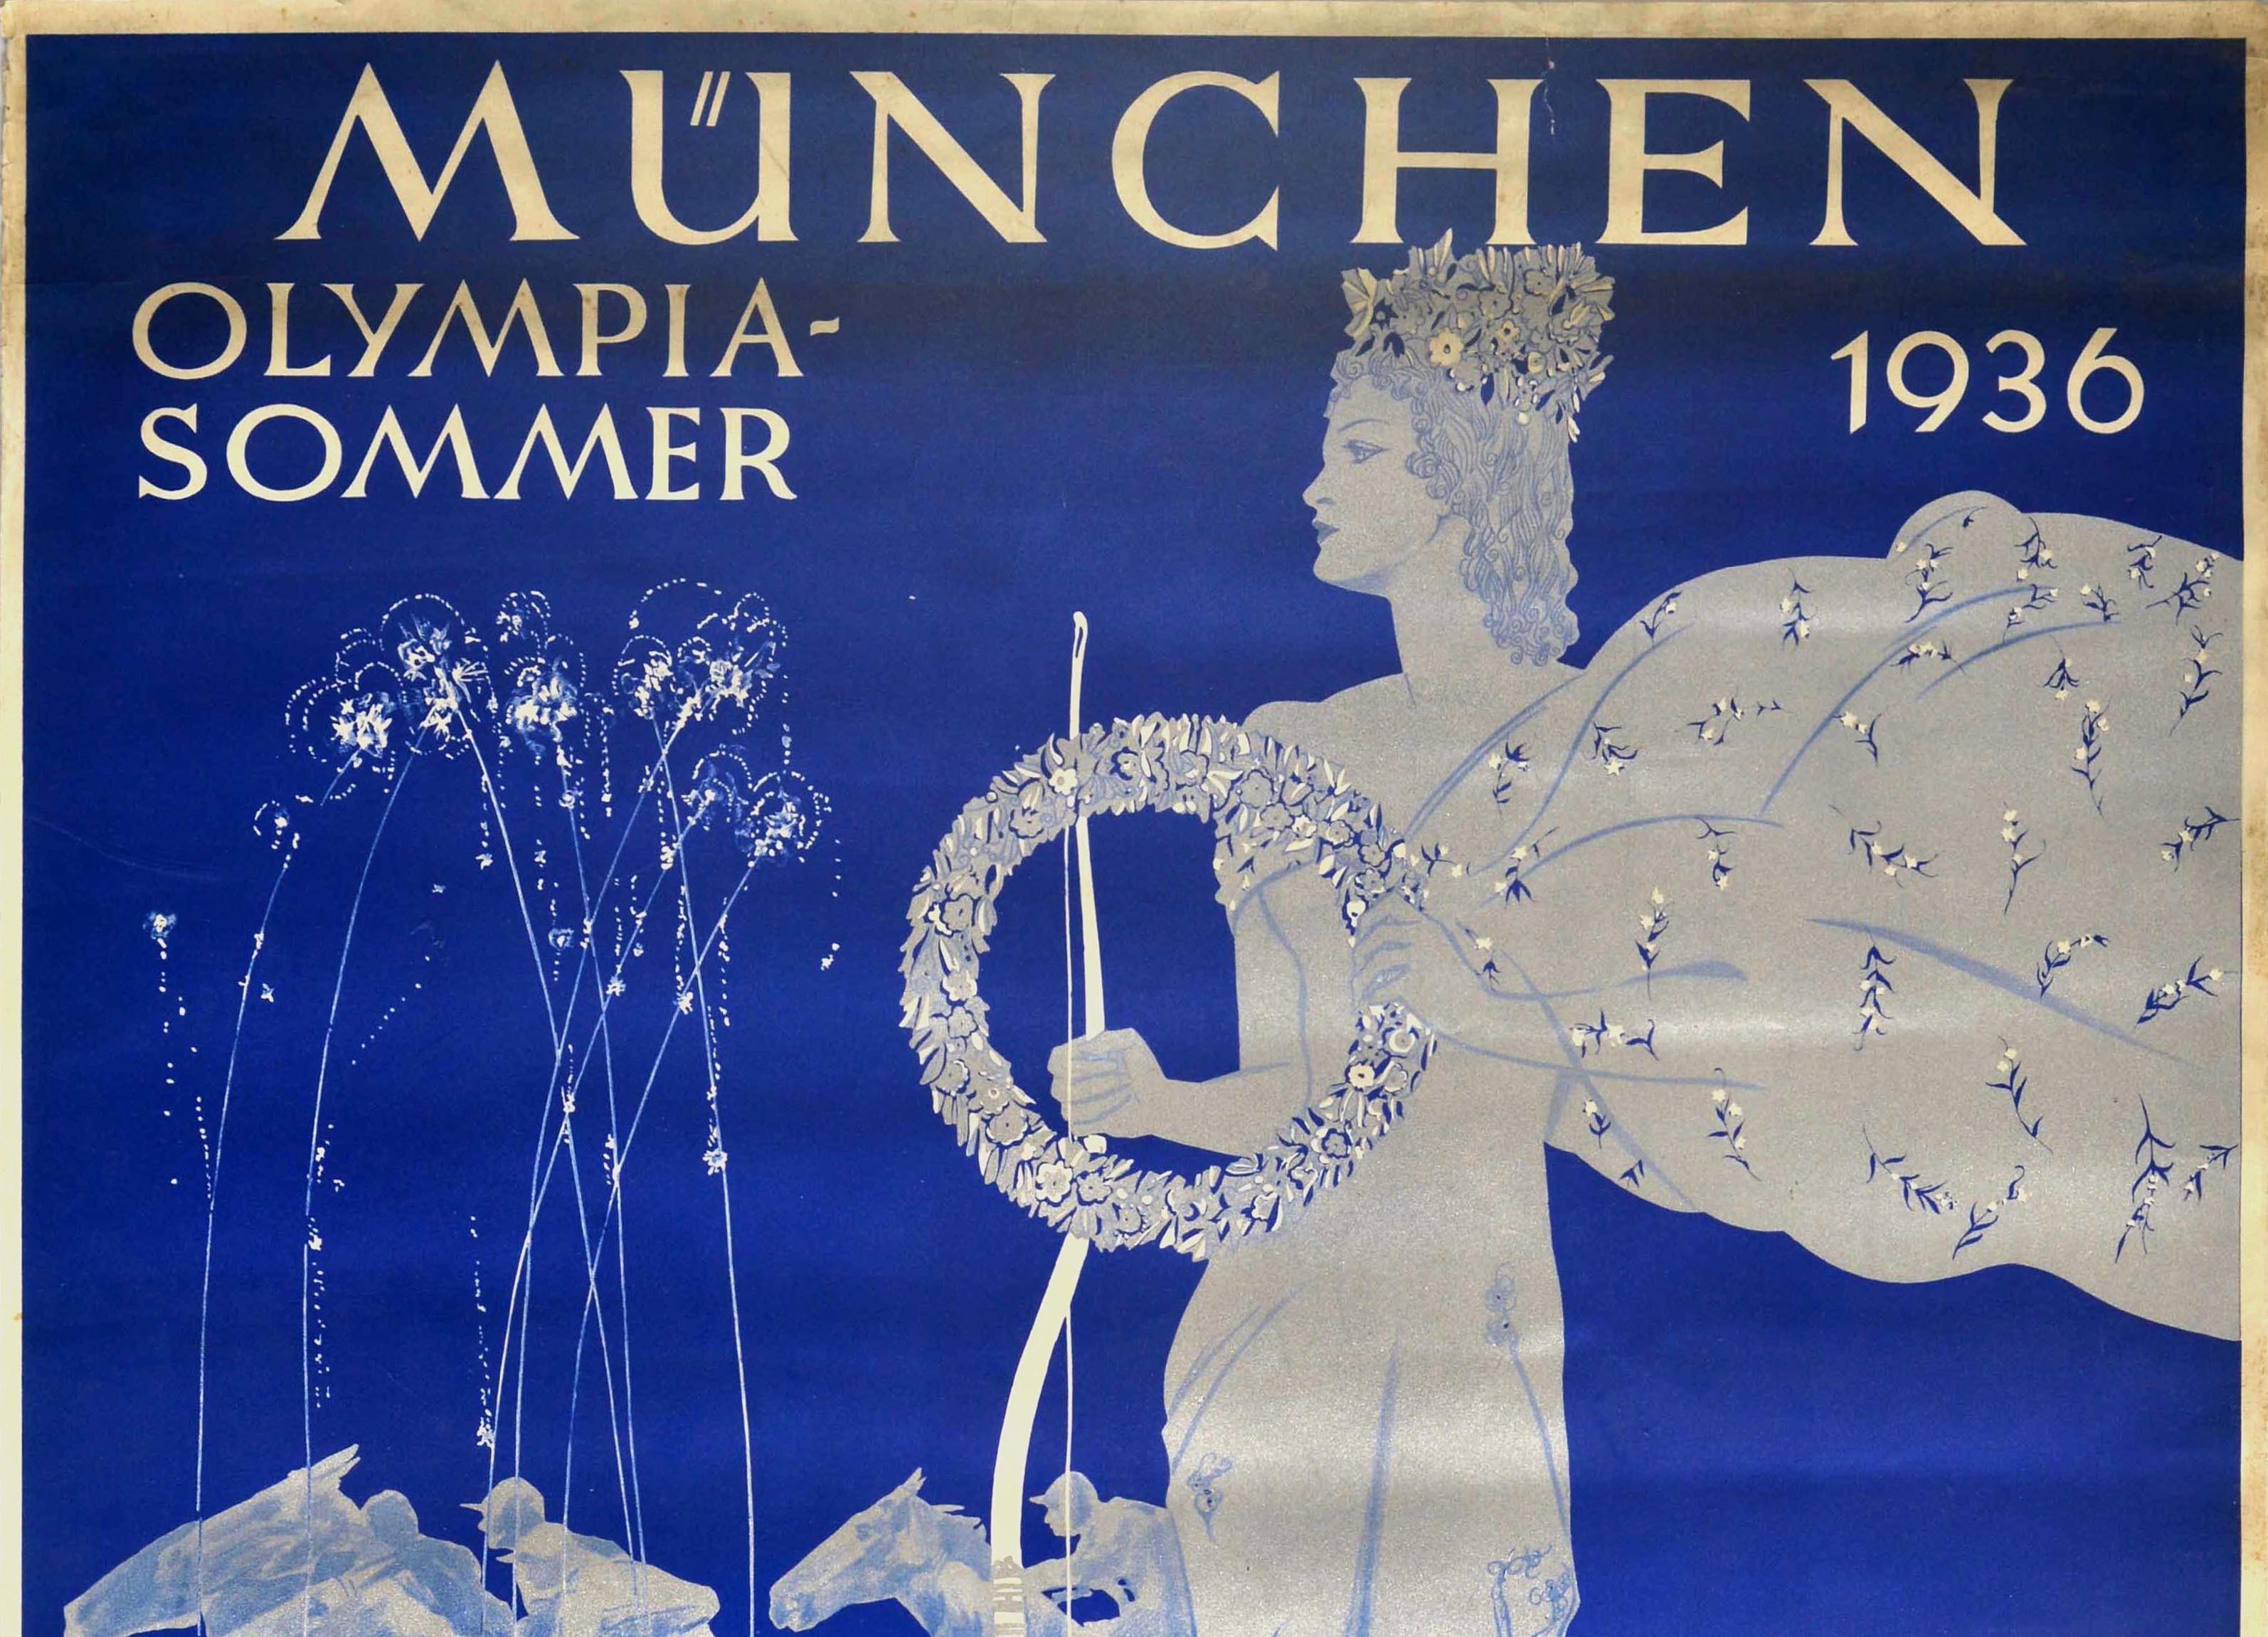 Original vintage Munich Olympic Summer sports poster for the annual Brown Ribbon of Germany / Das Braune Band von Deutschland 26 July 1936 - 500 Years of German Horse Racing in Munich at the international horse race week at the Riem racecourse 15 to